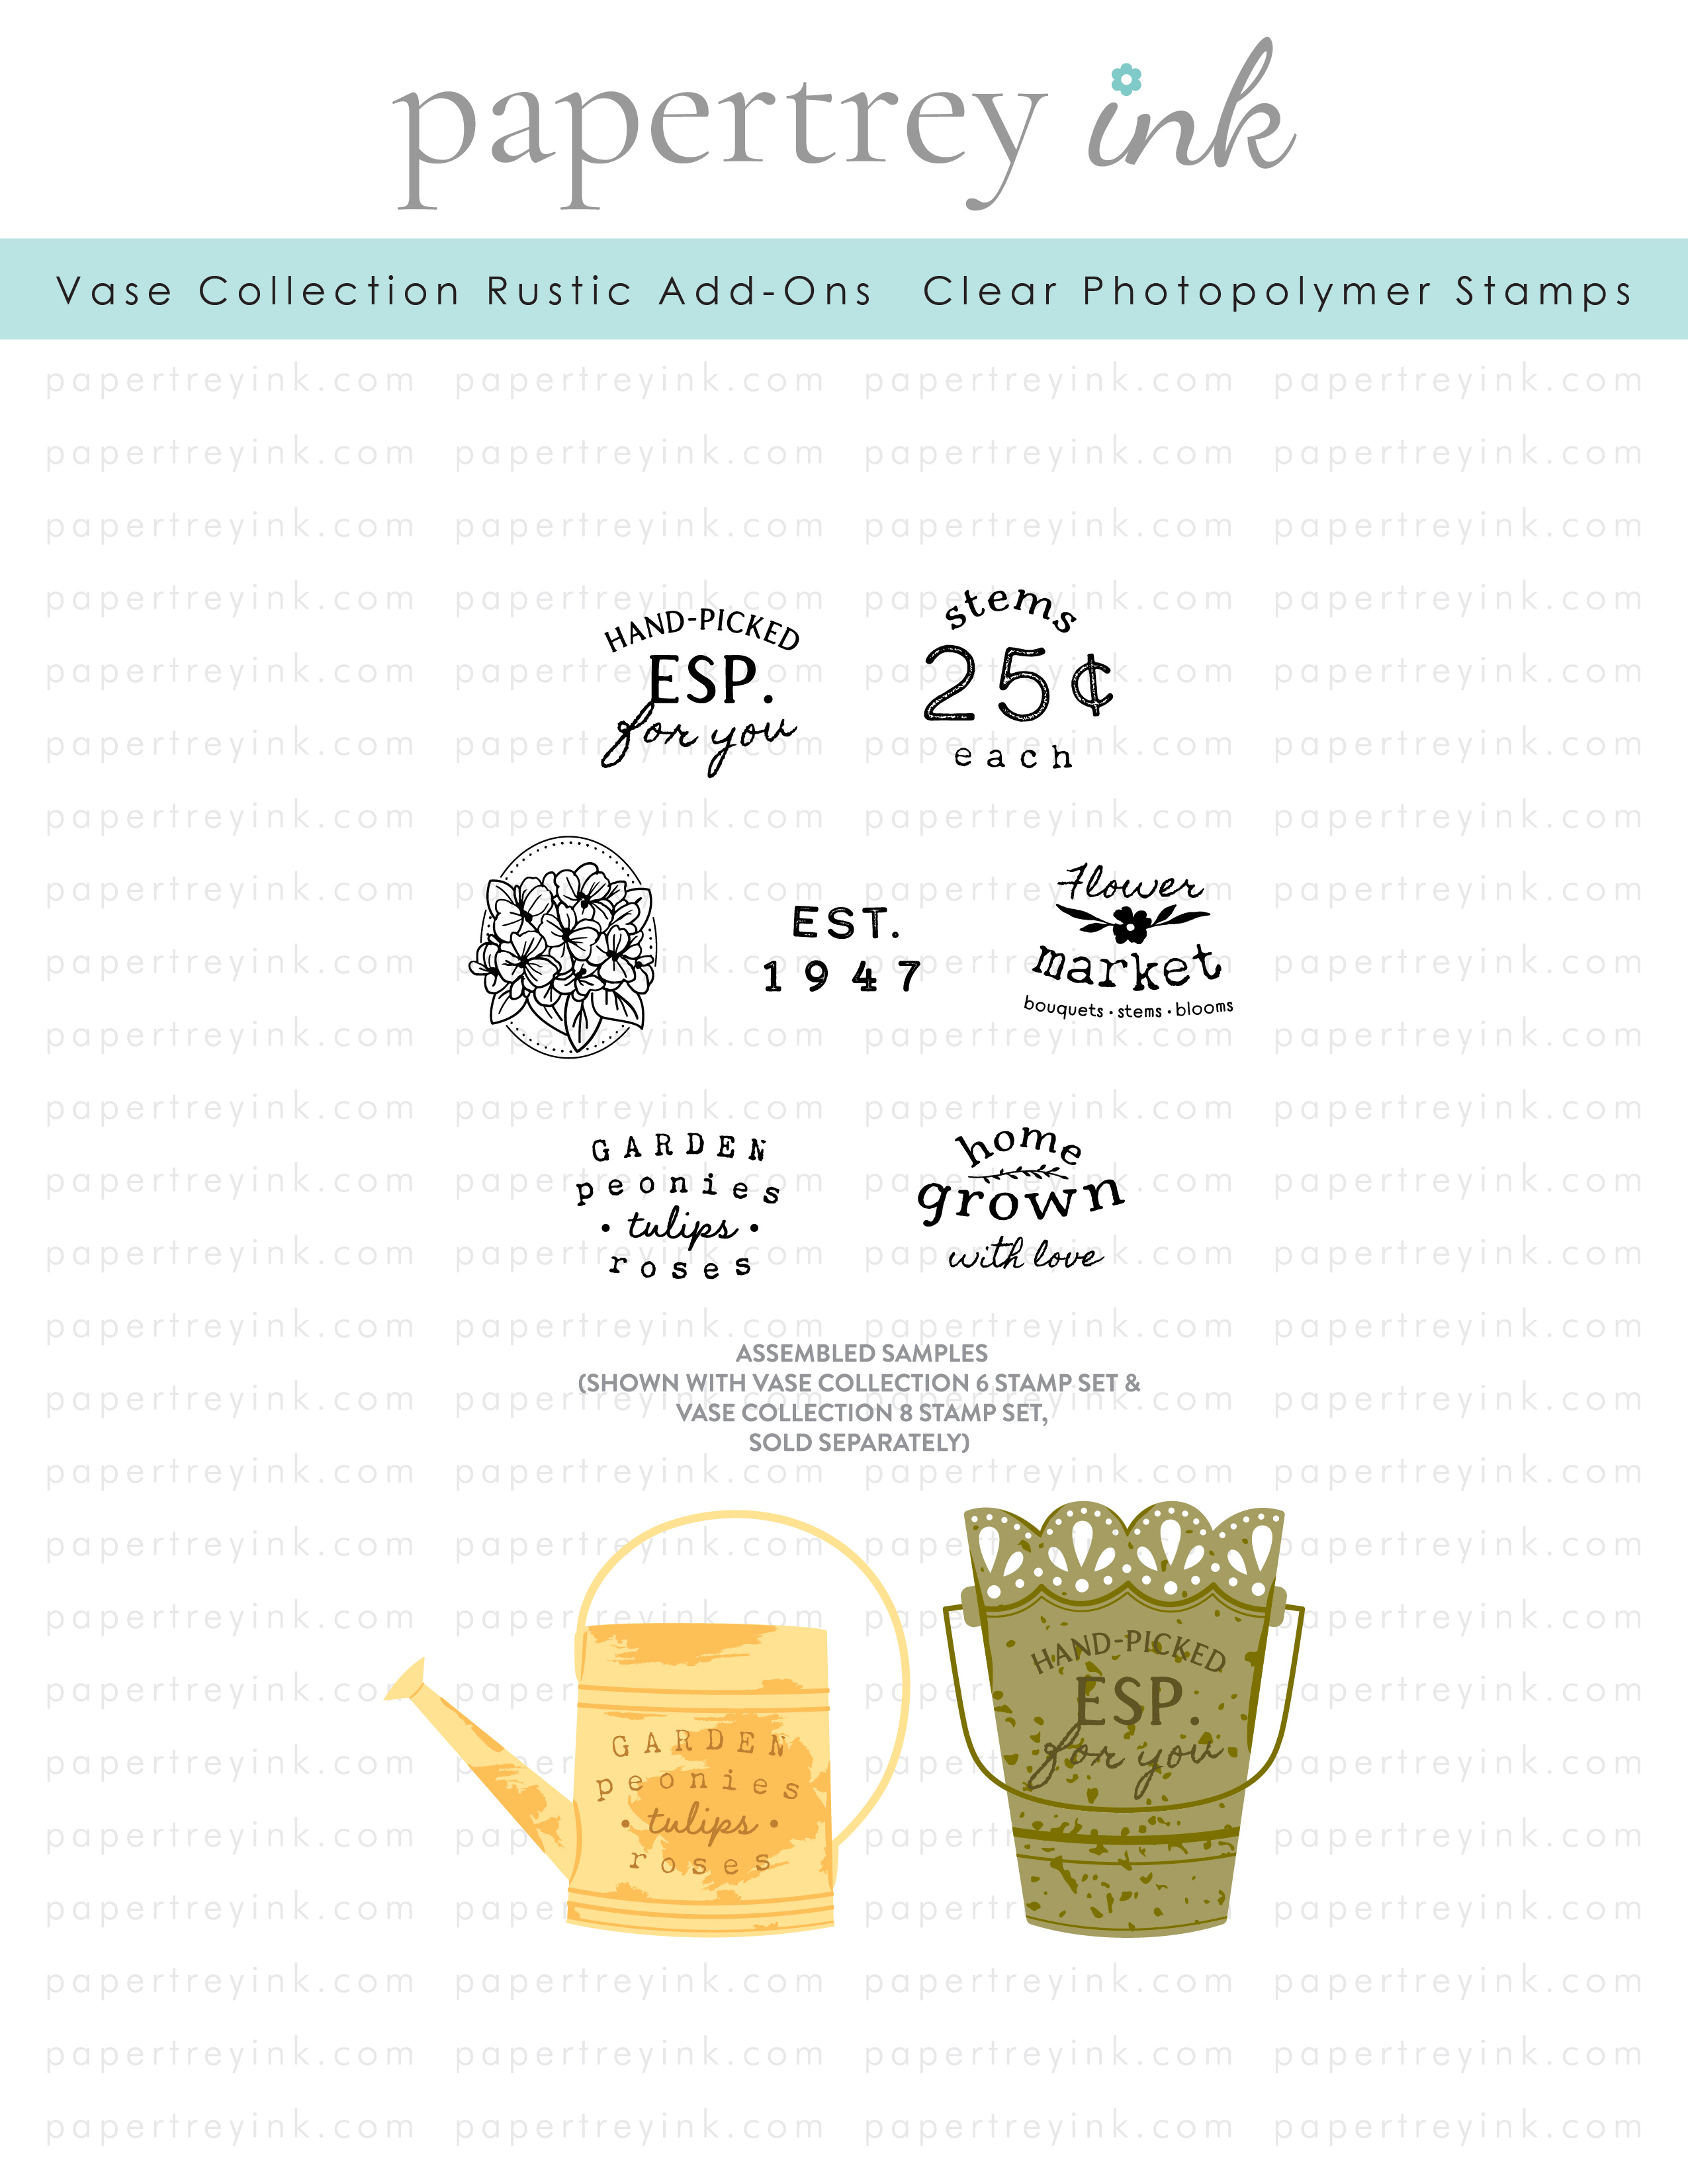 Vase Collection Rustic Add-Ons Mini Stamp Set: Papertrey Ink